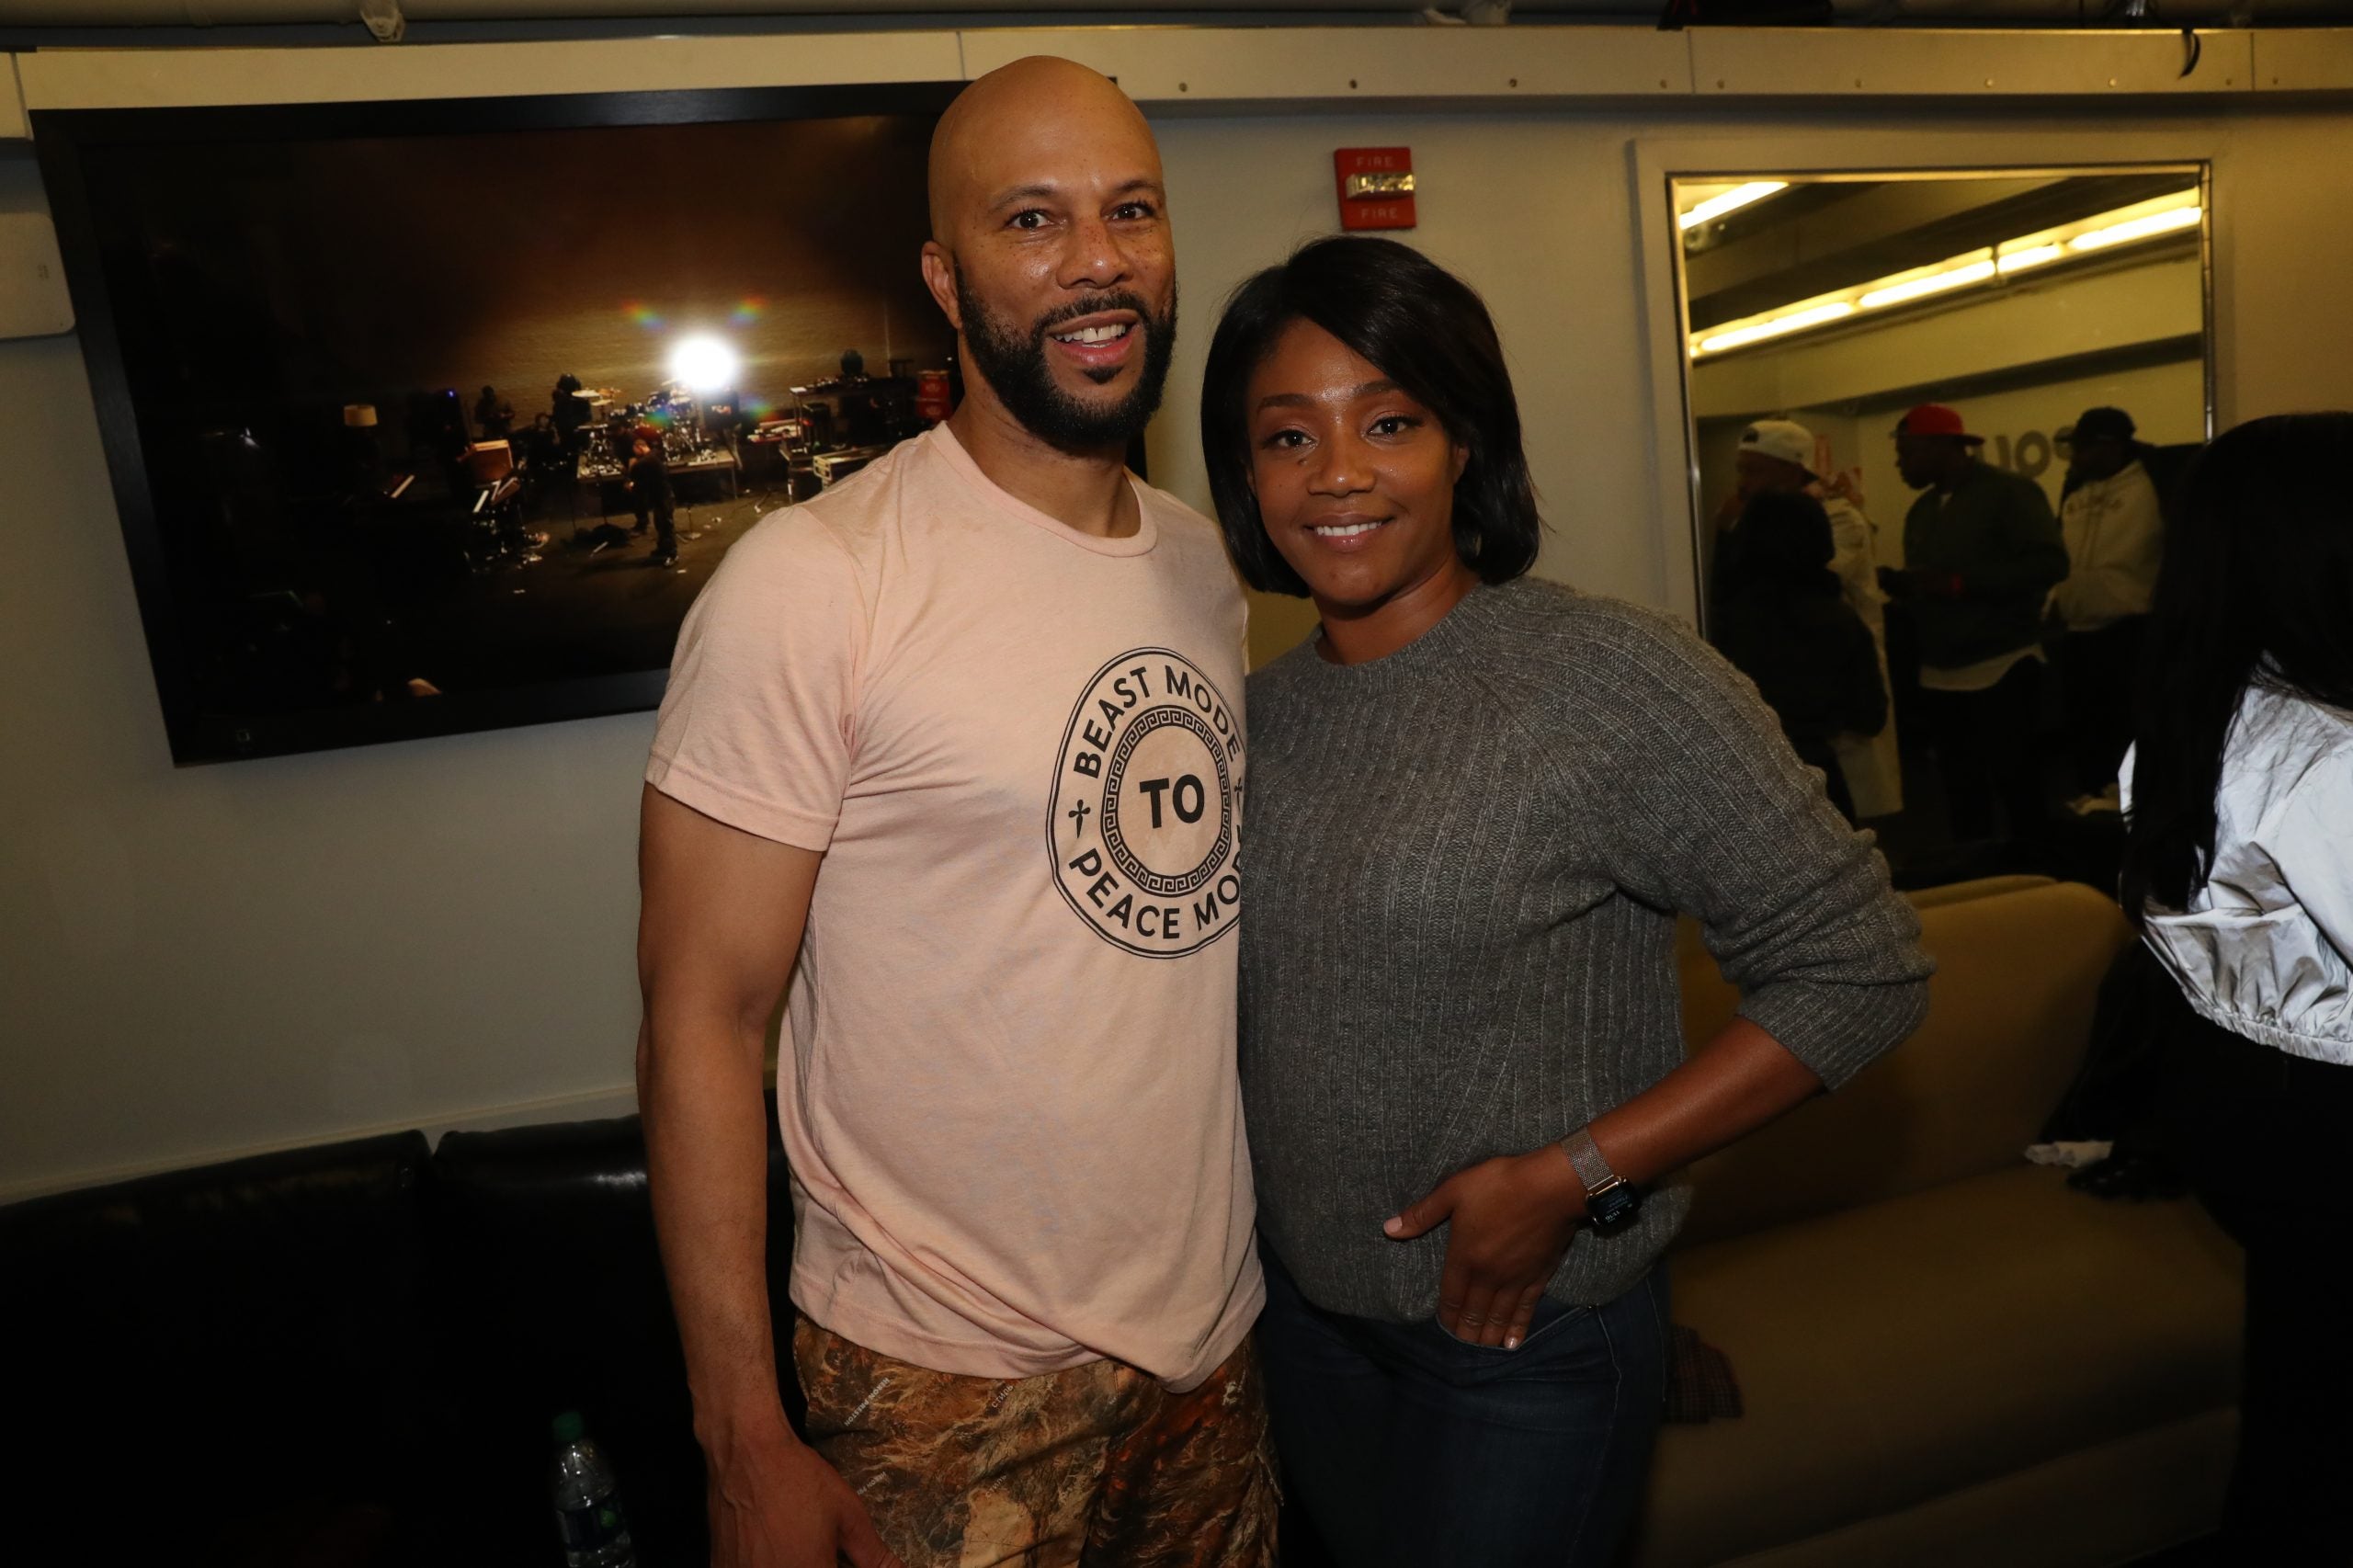 Tiffany Haddish Was 'Very Disappointed' With Common's Comments About Their Breakup